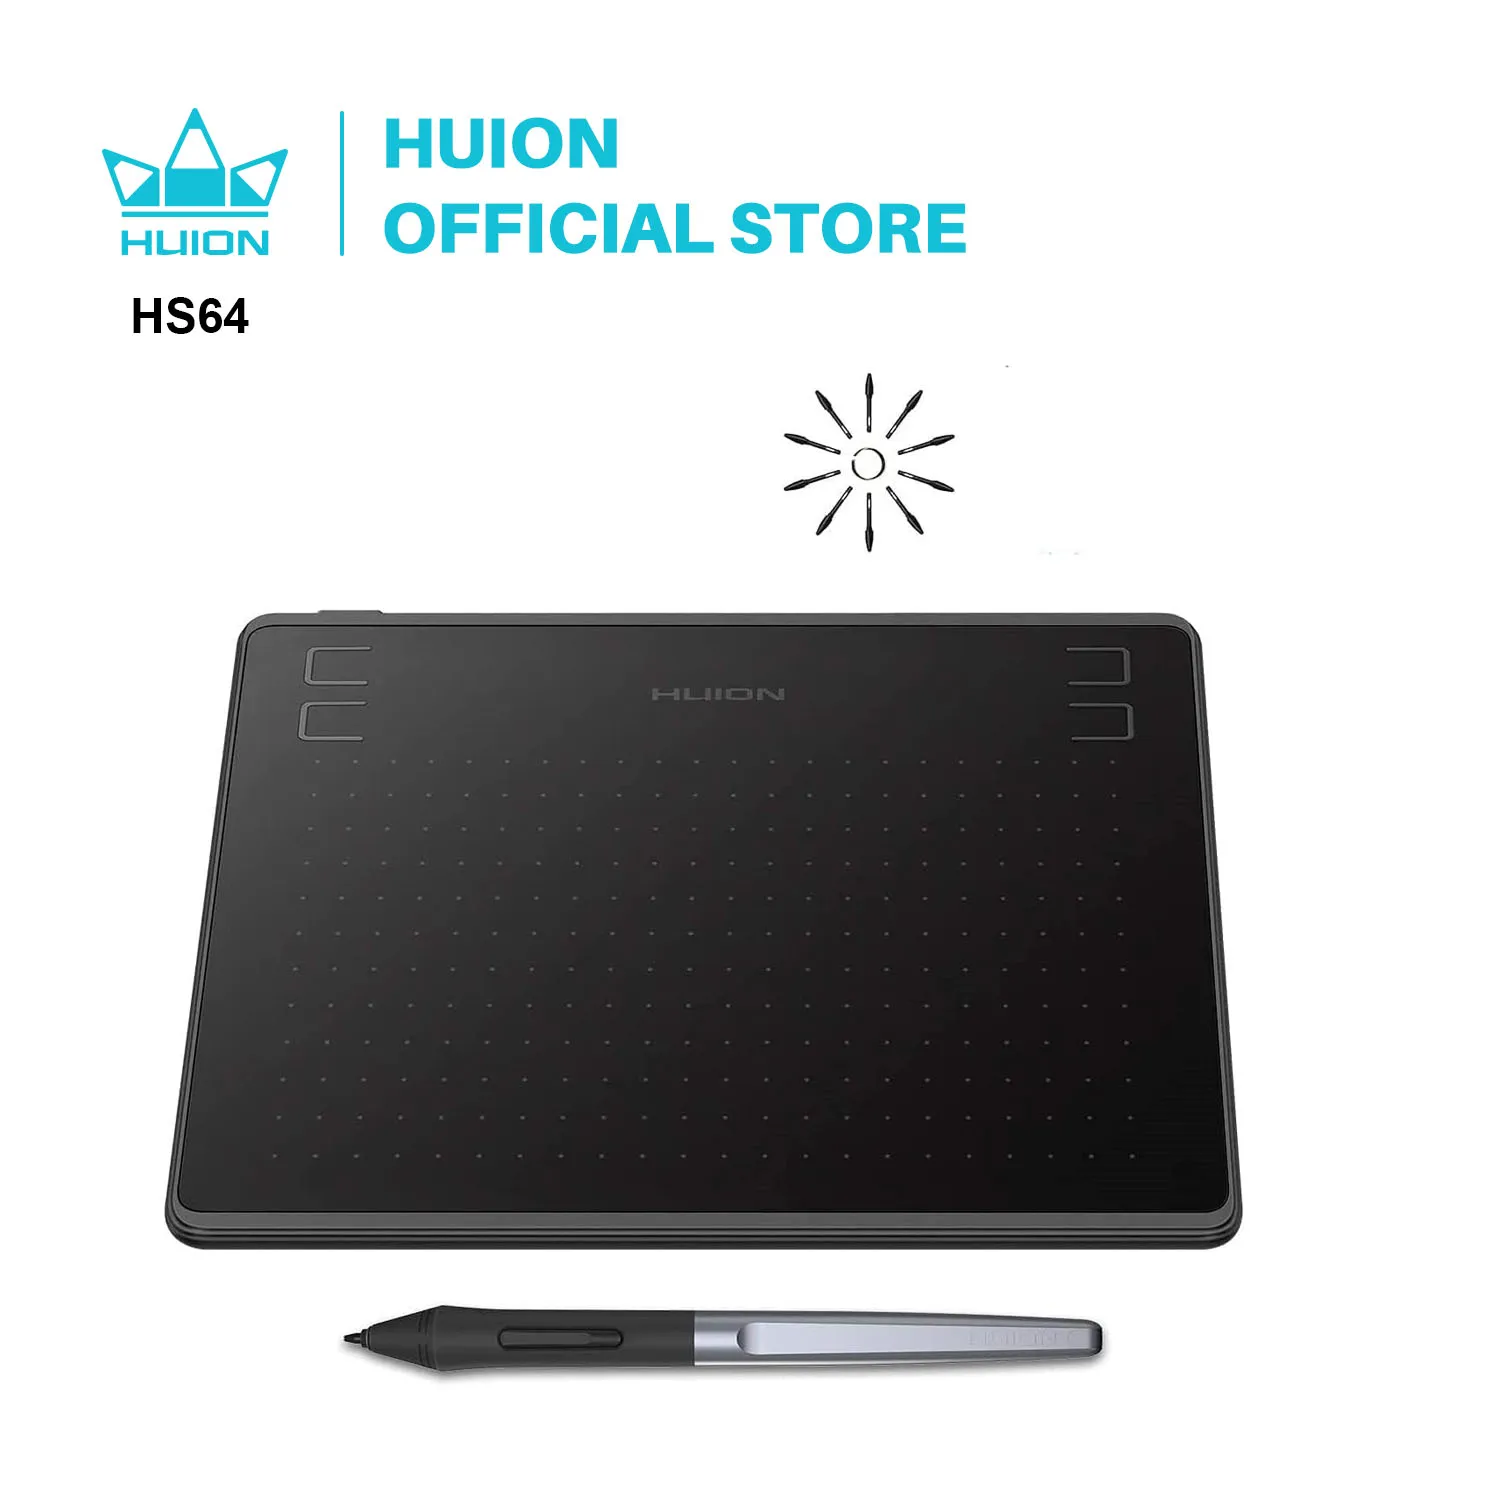 HUION HS64 6x4 Inches Graphic Drawing Tablets Phone Tablet Painting Tools with Battery-Free Stylus for Android Windows and macOS